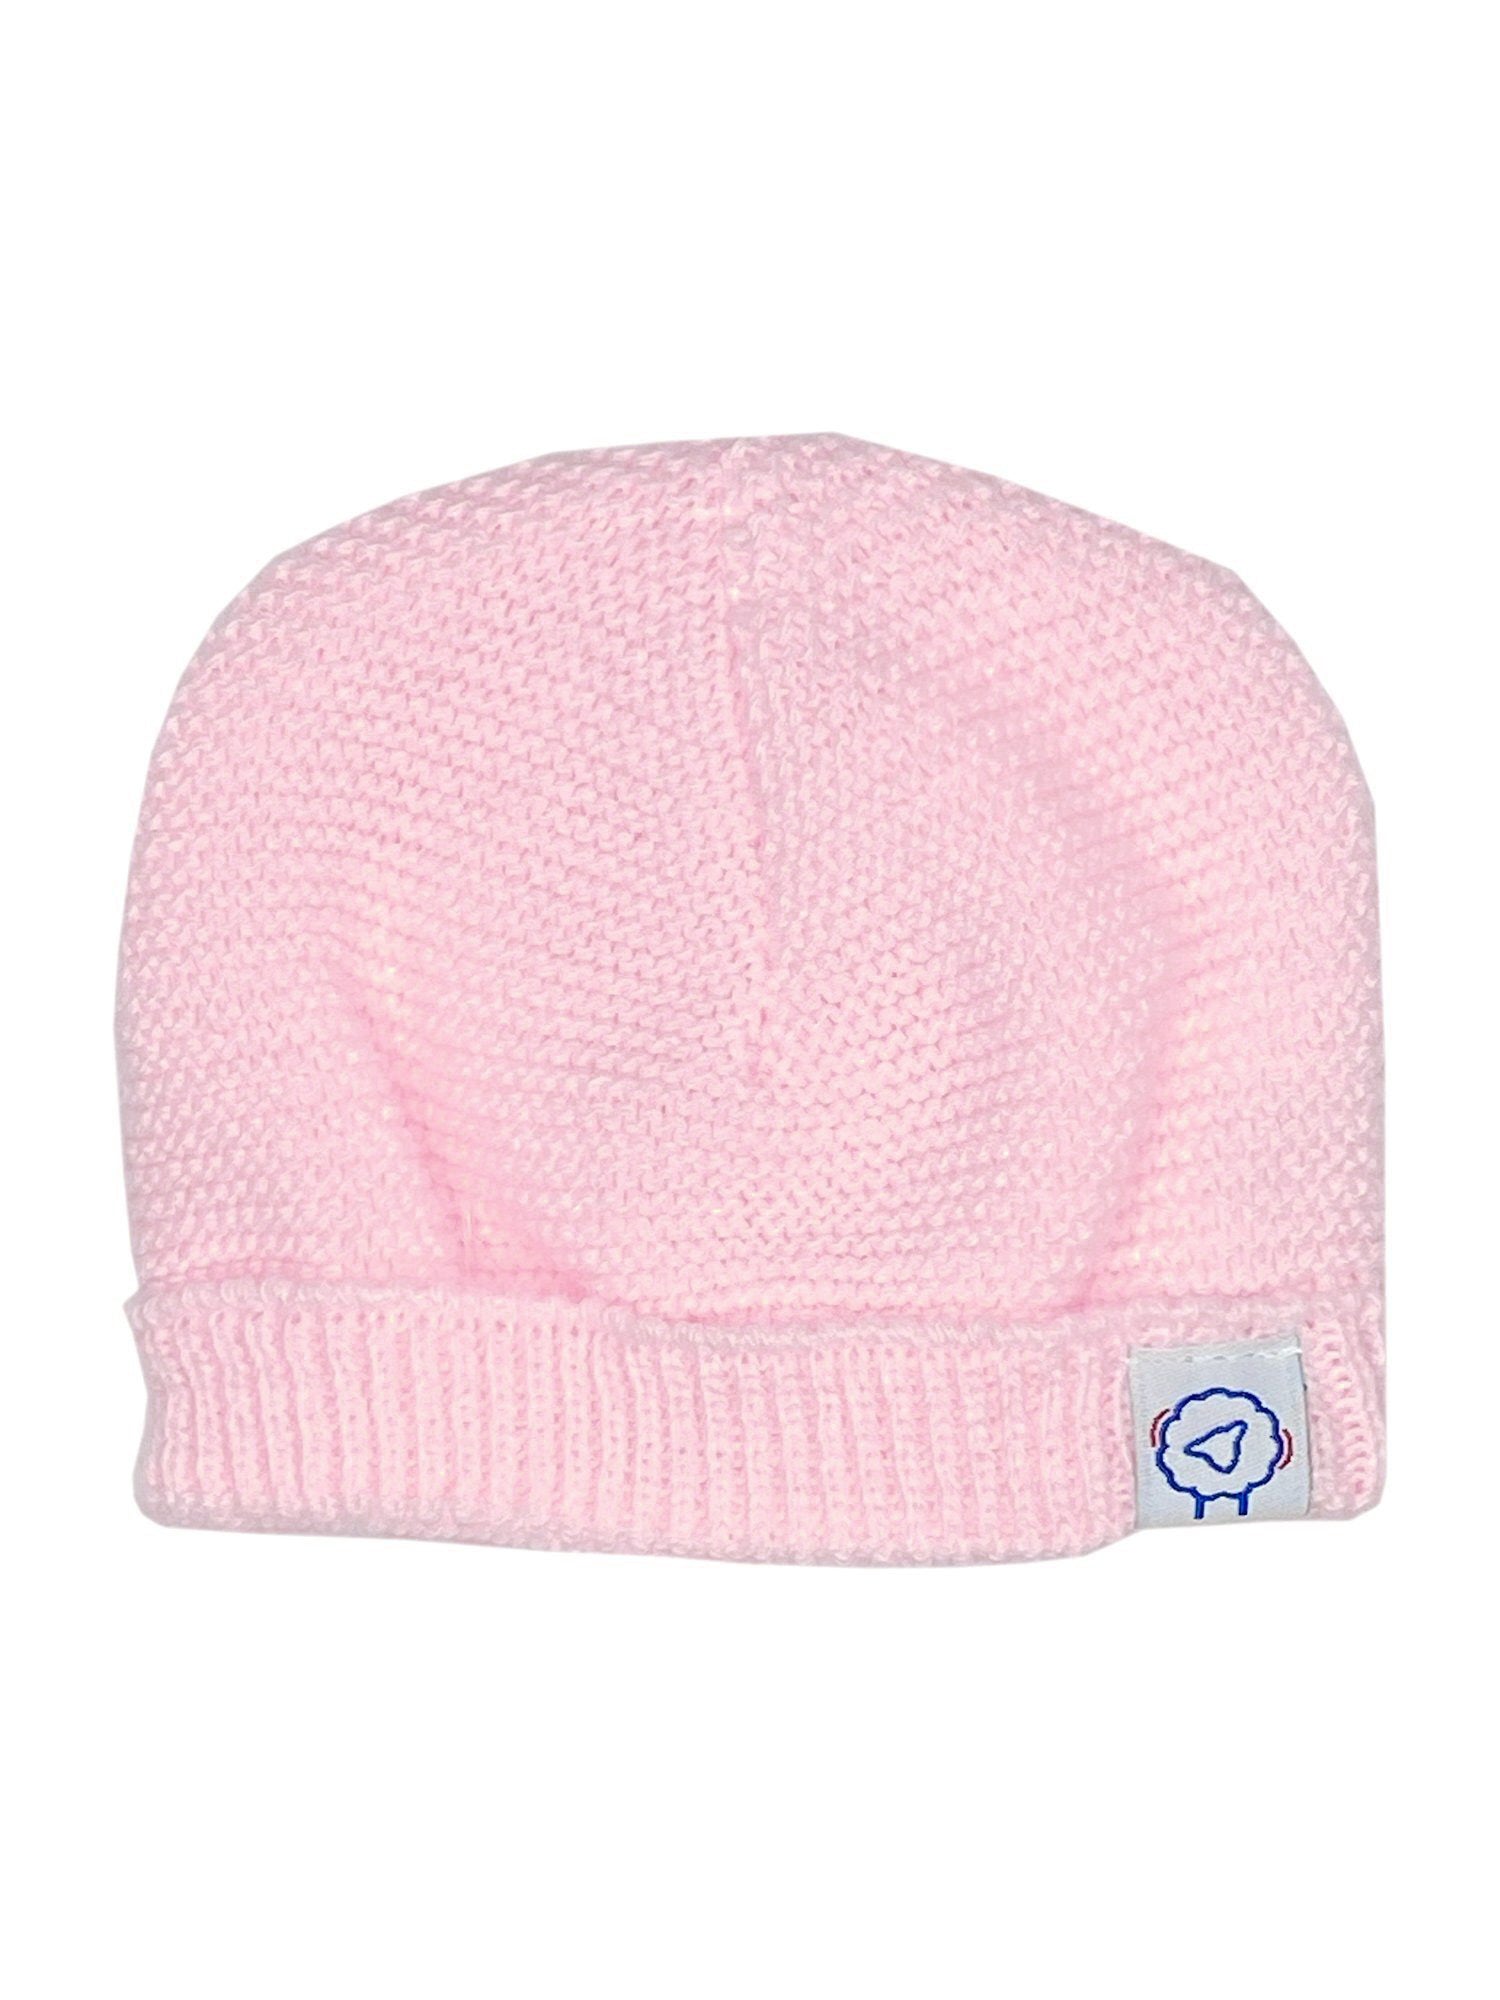 Tiny Baby Knitted Hat, Pink - Hat - La Manufacture de Layette